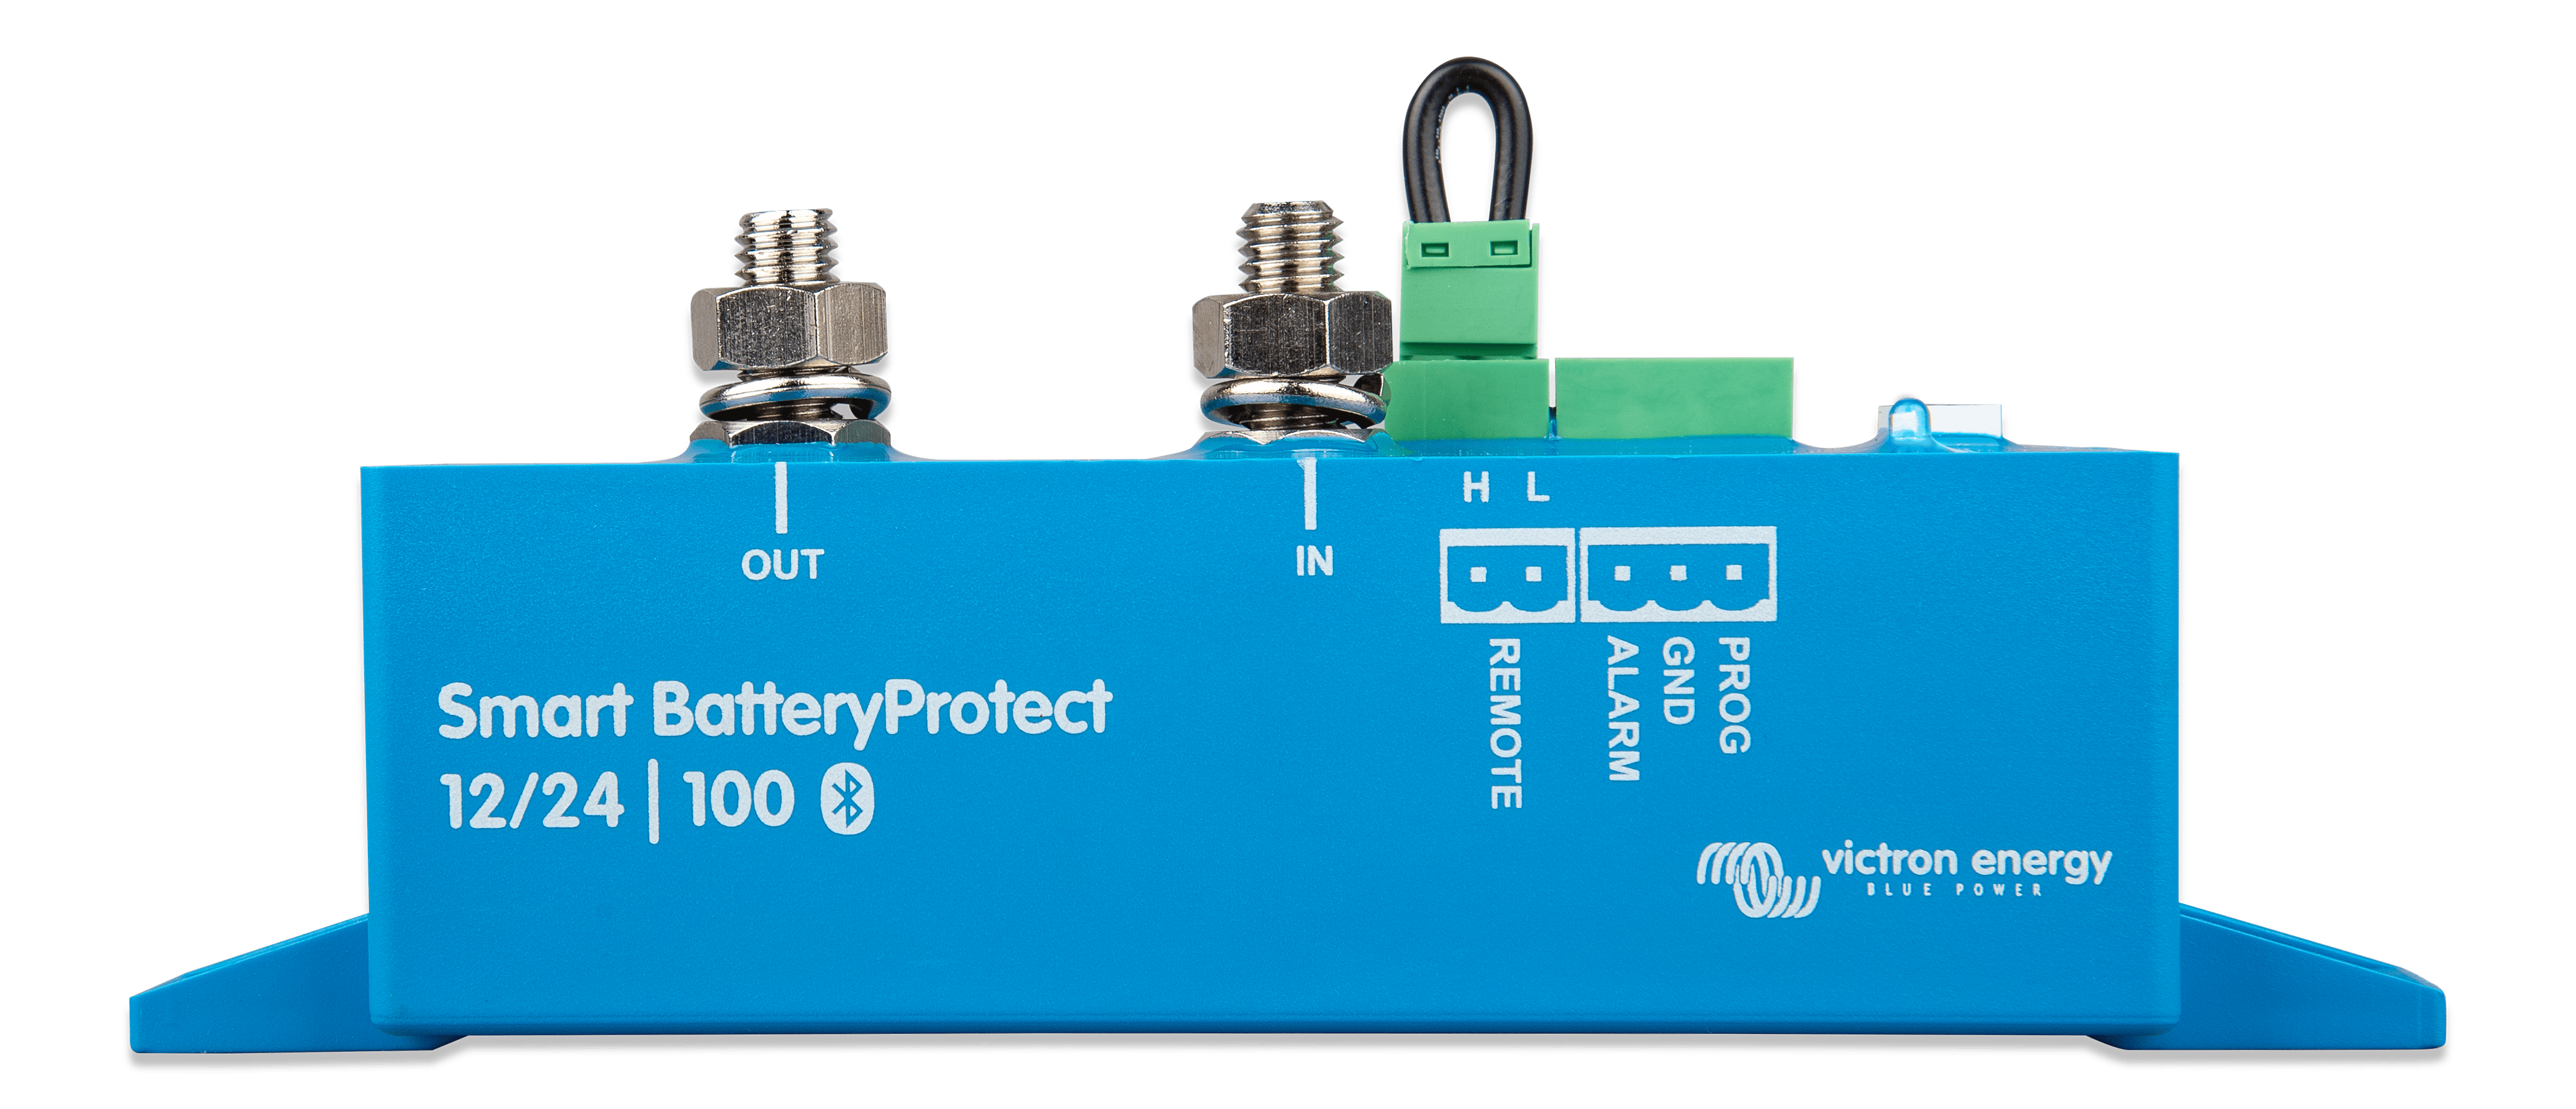 What load types are acceptable for the Victron Battery Protect?